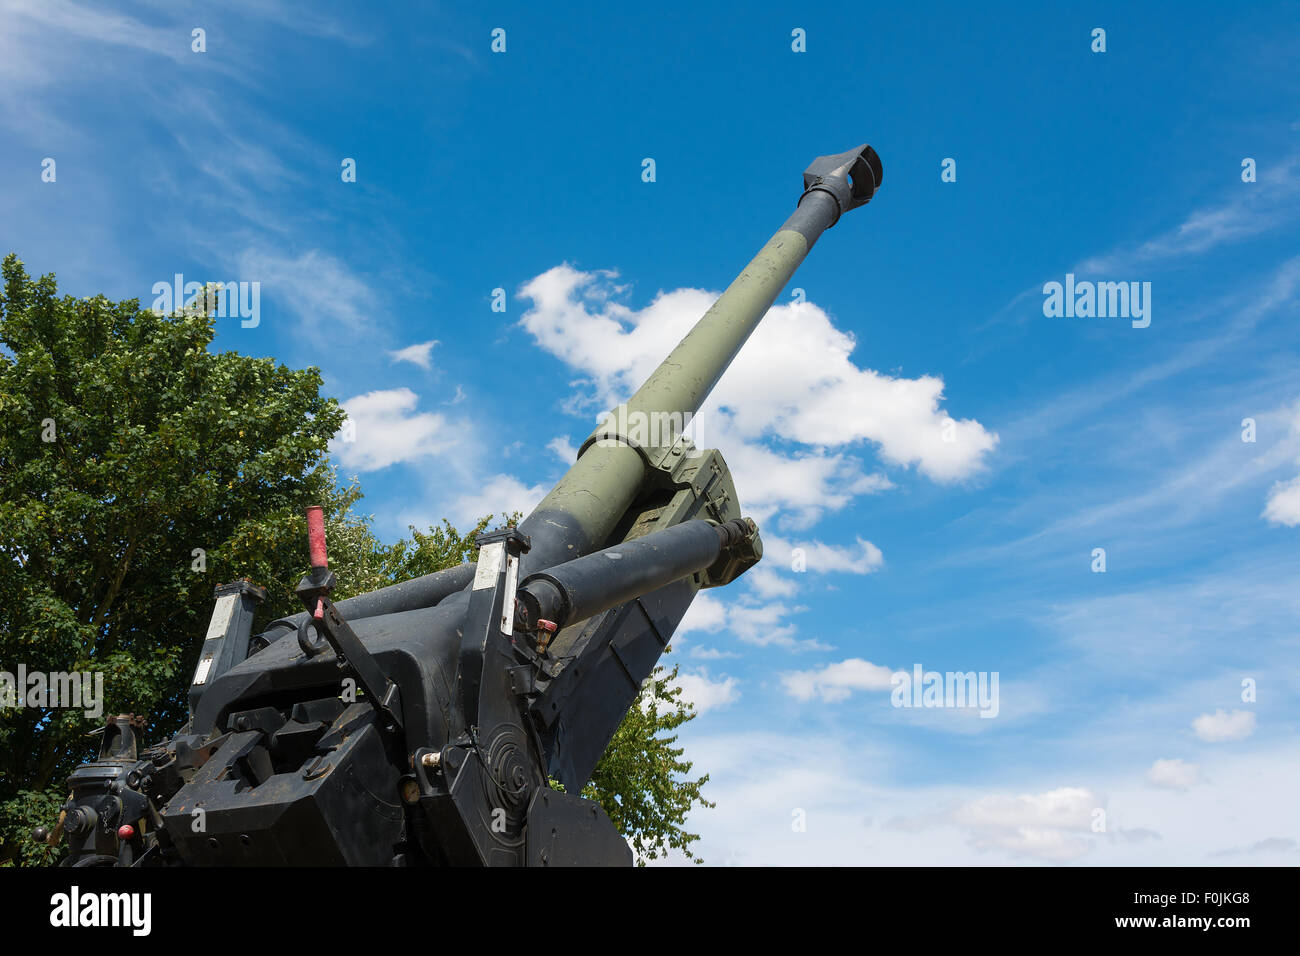 Gun Barrel Howitzer High Resolution Stock Photography and Images - Alamy